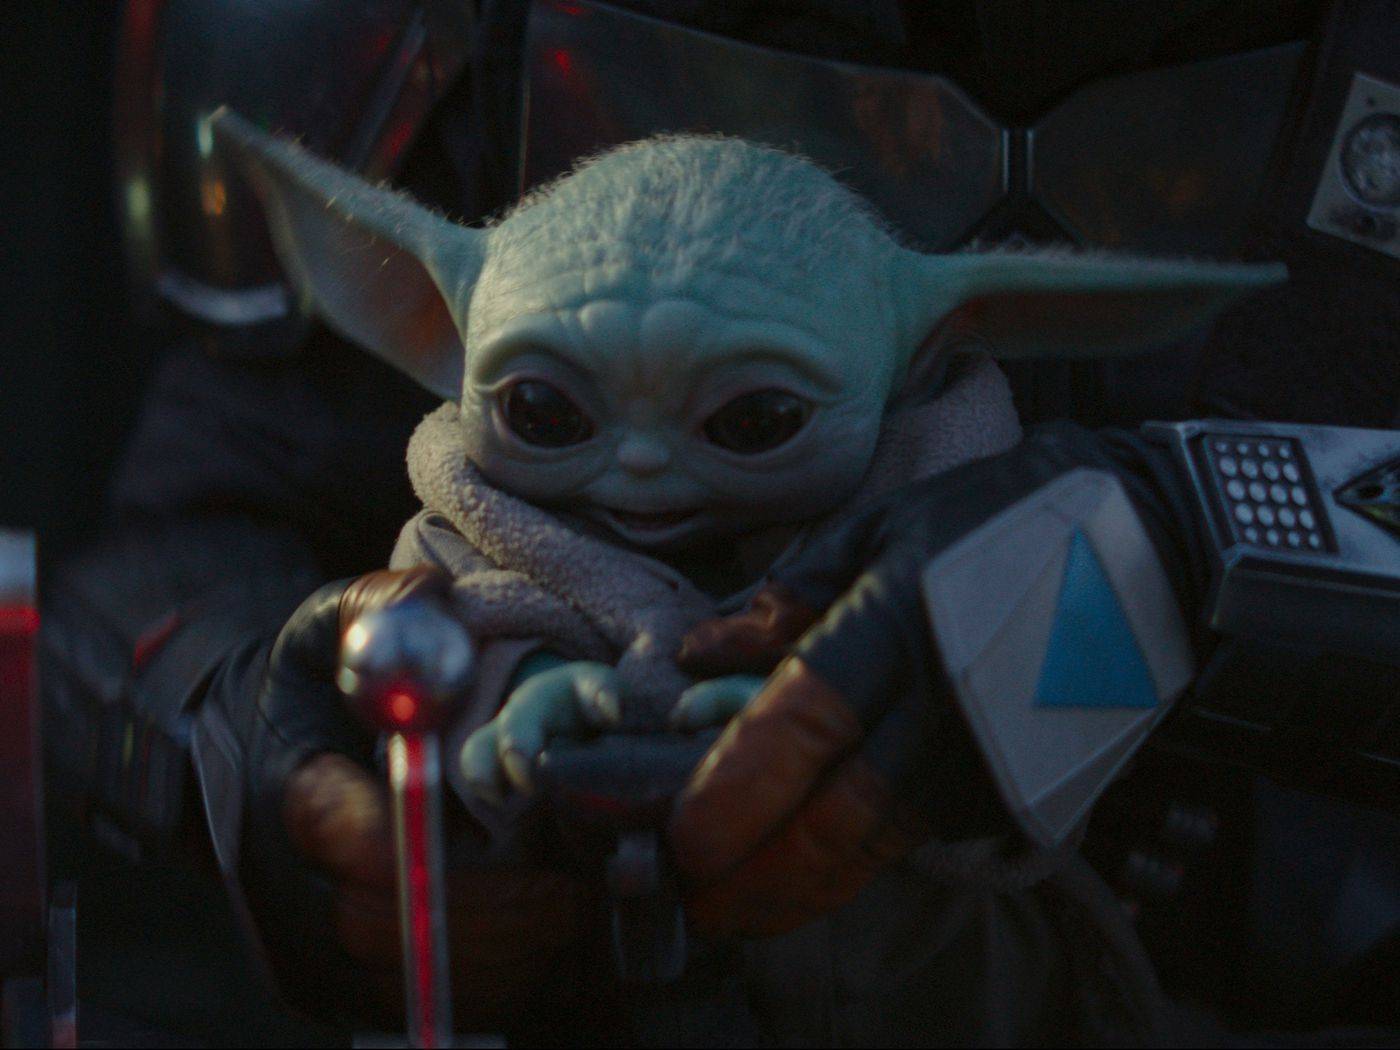 I guess we have to cease calling him Runt one Yoda now that his precise name modified into revealed